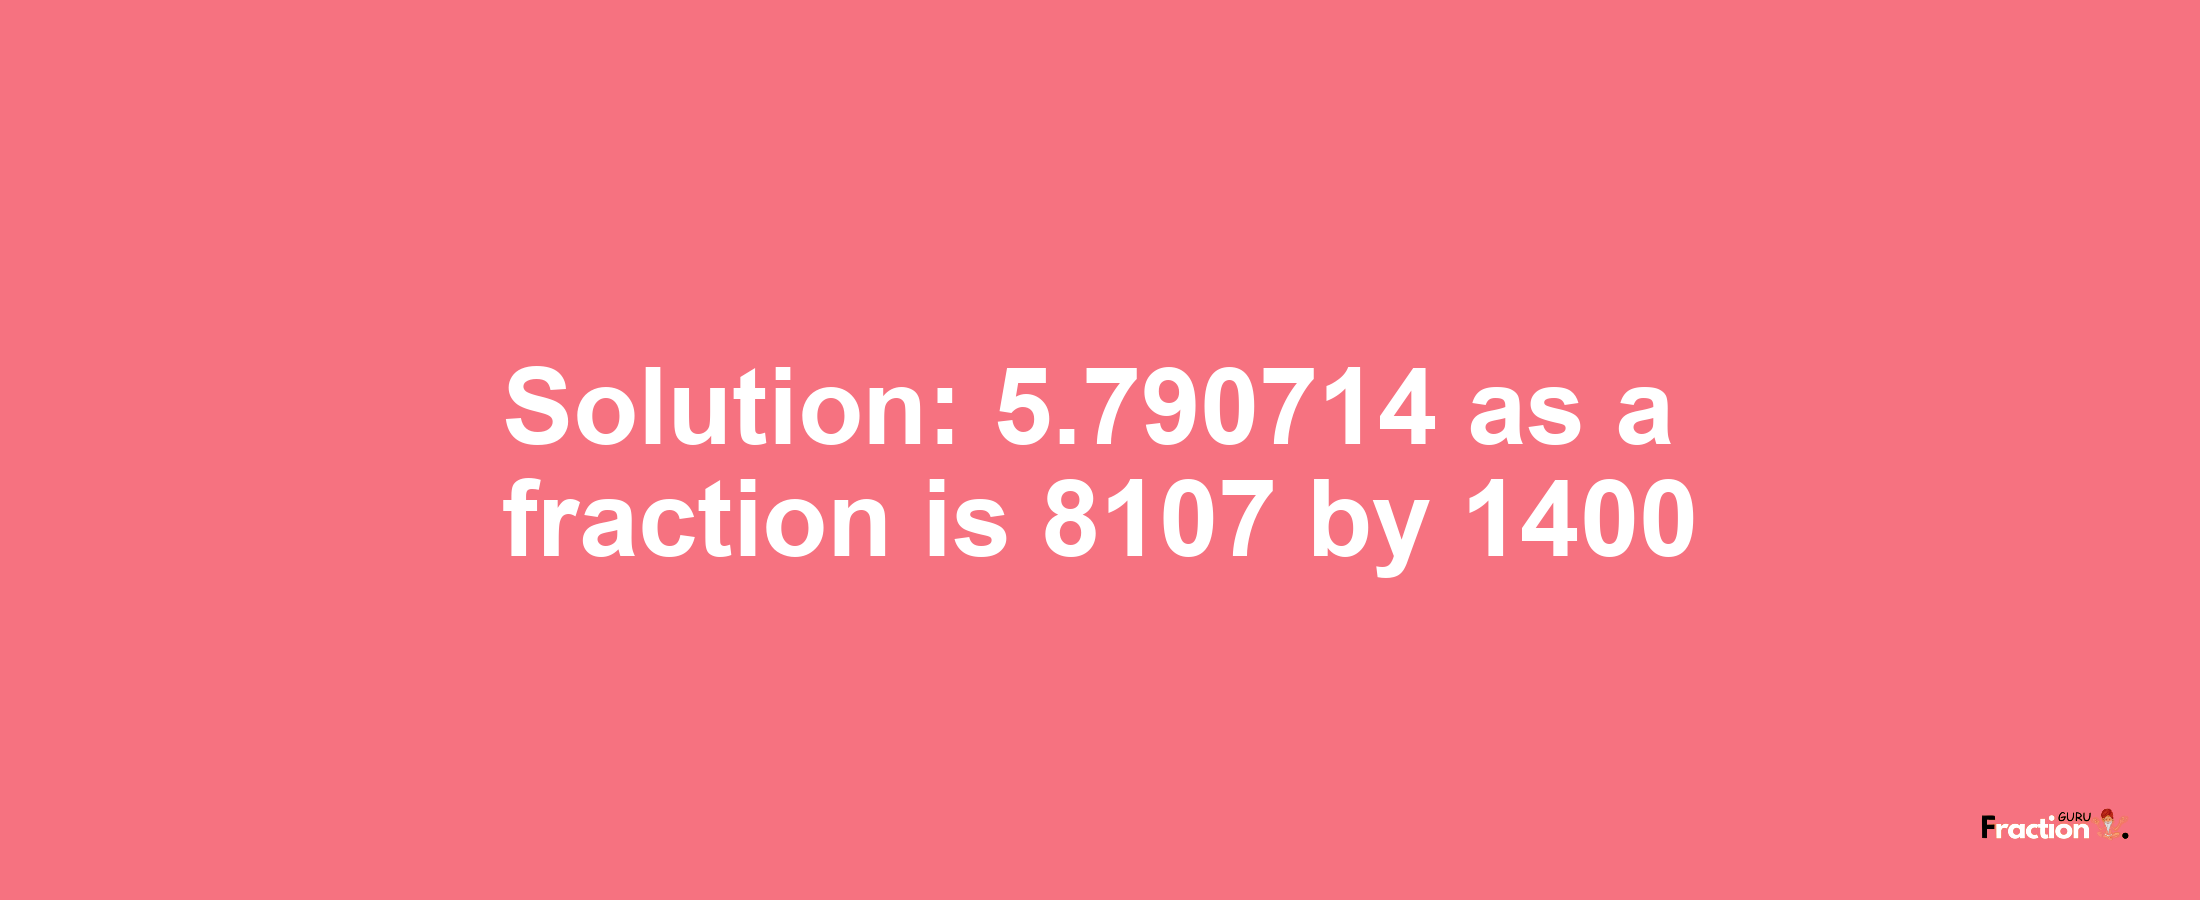 Solution:5.790714 as a fraction is 8107/1400